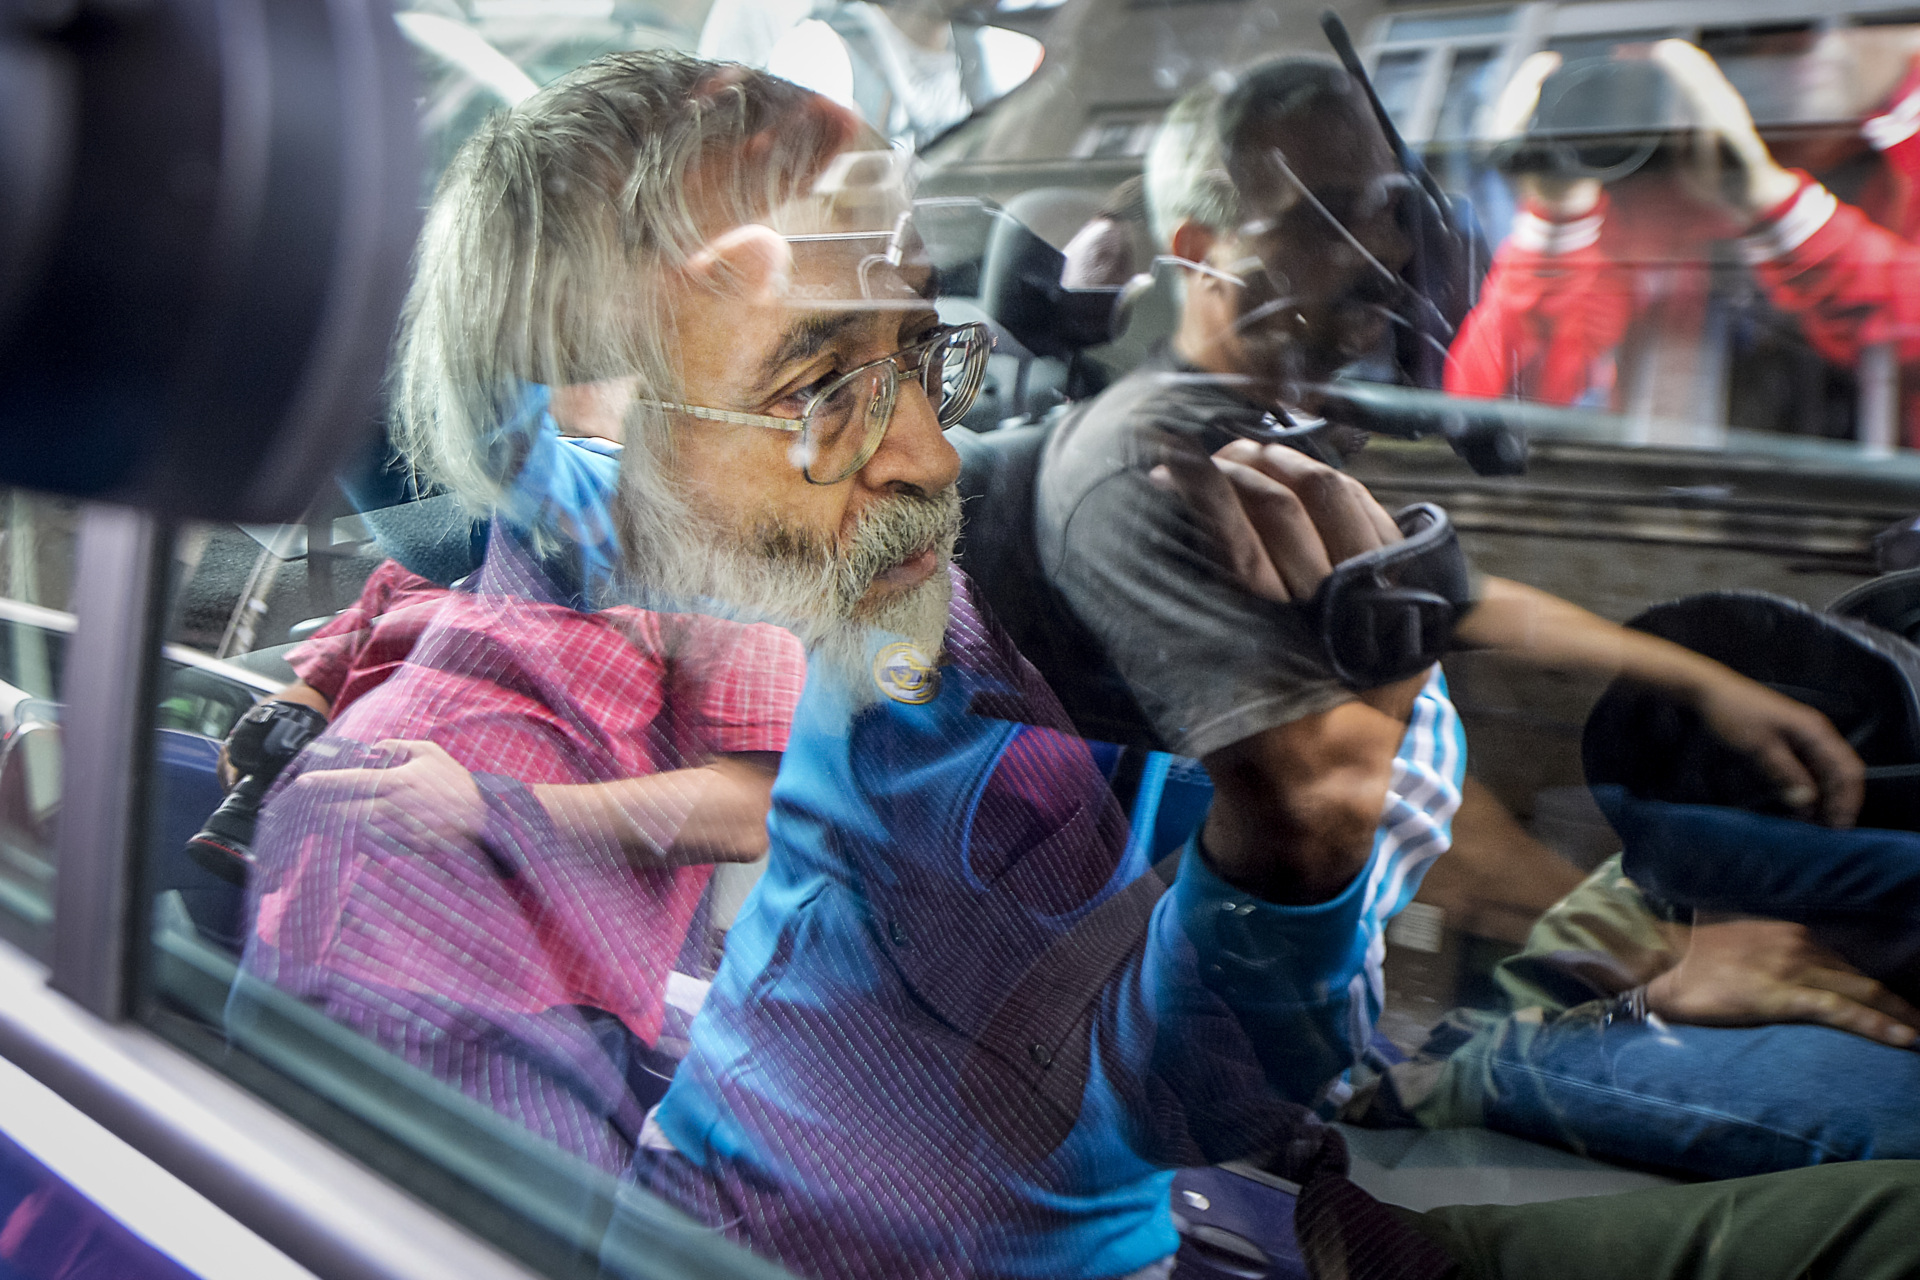 Romanian guru Gregorian Bivolaru sits in a vehicle, after a hearing at the Romanian Police headquarters in Bucharest, Romania, Wednesday, Aug. 24, 2016. French authorities arrested the leader of a multinational tantric yoga organization Tuesday Nov. 28, 2023 on suspicion of indoctrinating female followers for sexual exploitation. The Romanian guru at the heart of the Atman Yoga Federation was detained during a massive morning police operation across the Paris region. (AP Photo/Marian Ilie)